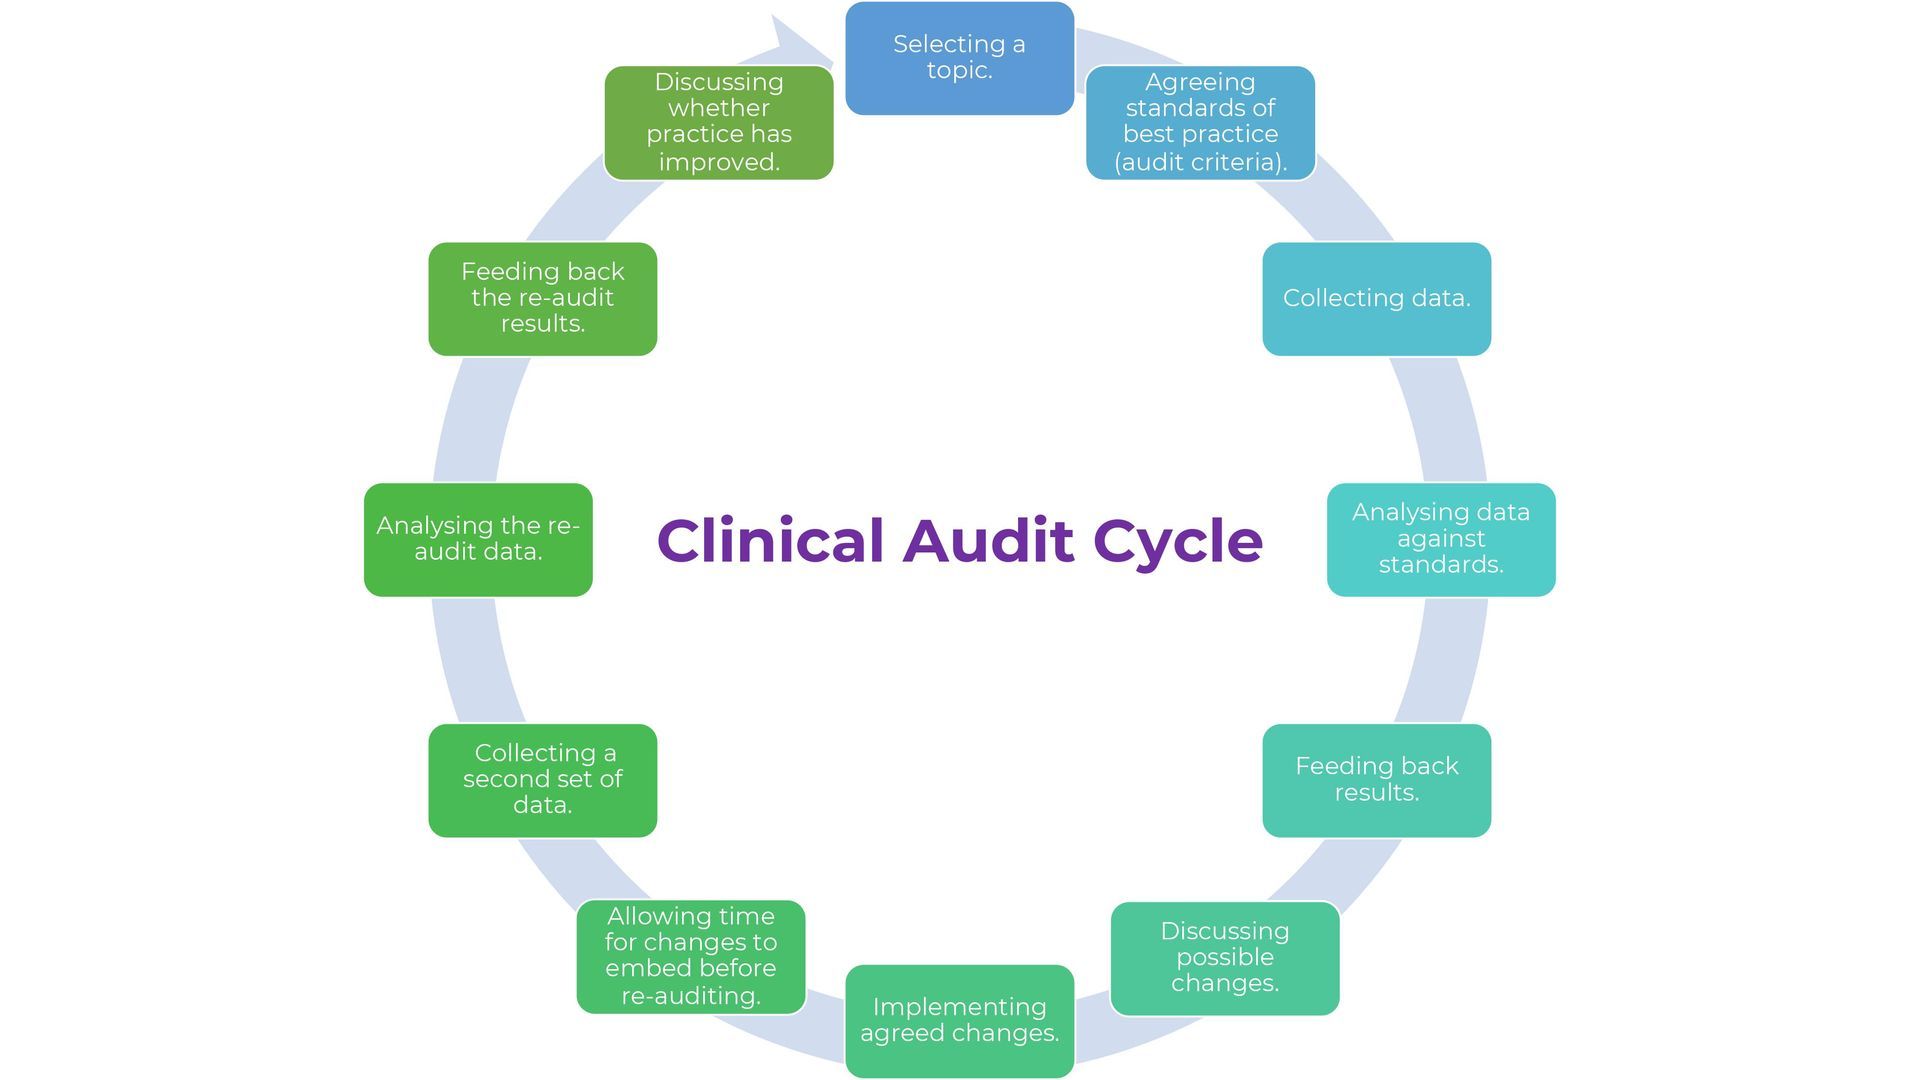 The Clinical Audit Cycle